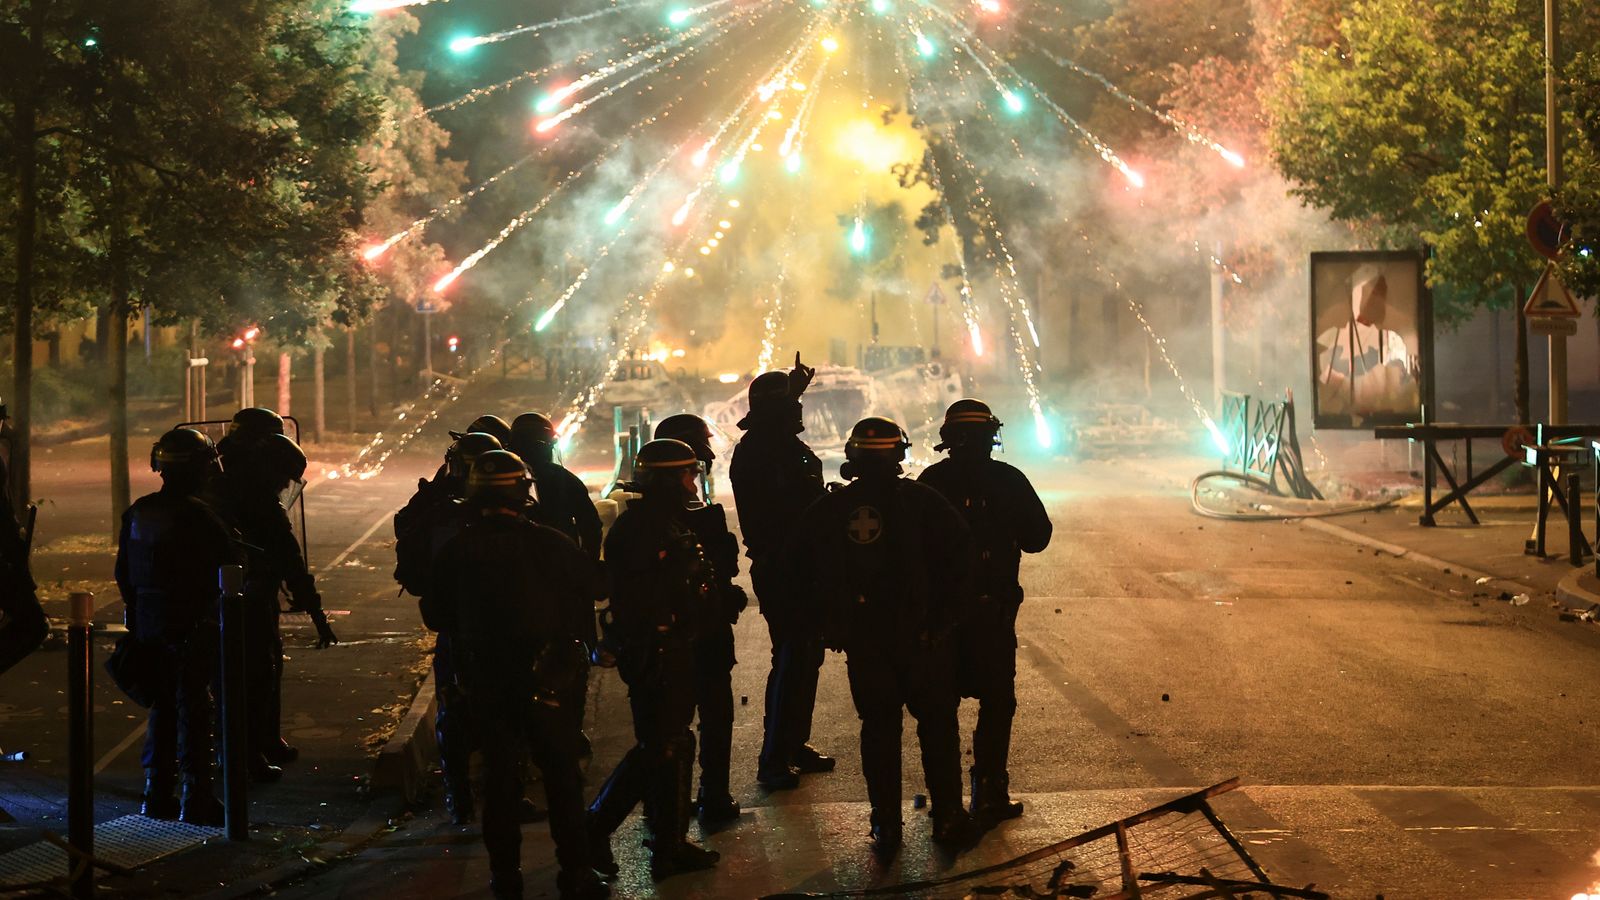 Paris riots: A youth told us, in the most blunt terms possible, that we weren't welcome